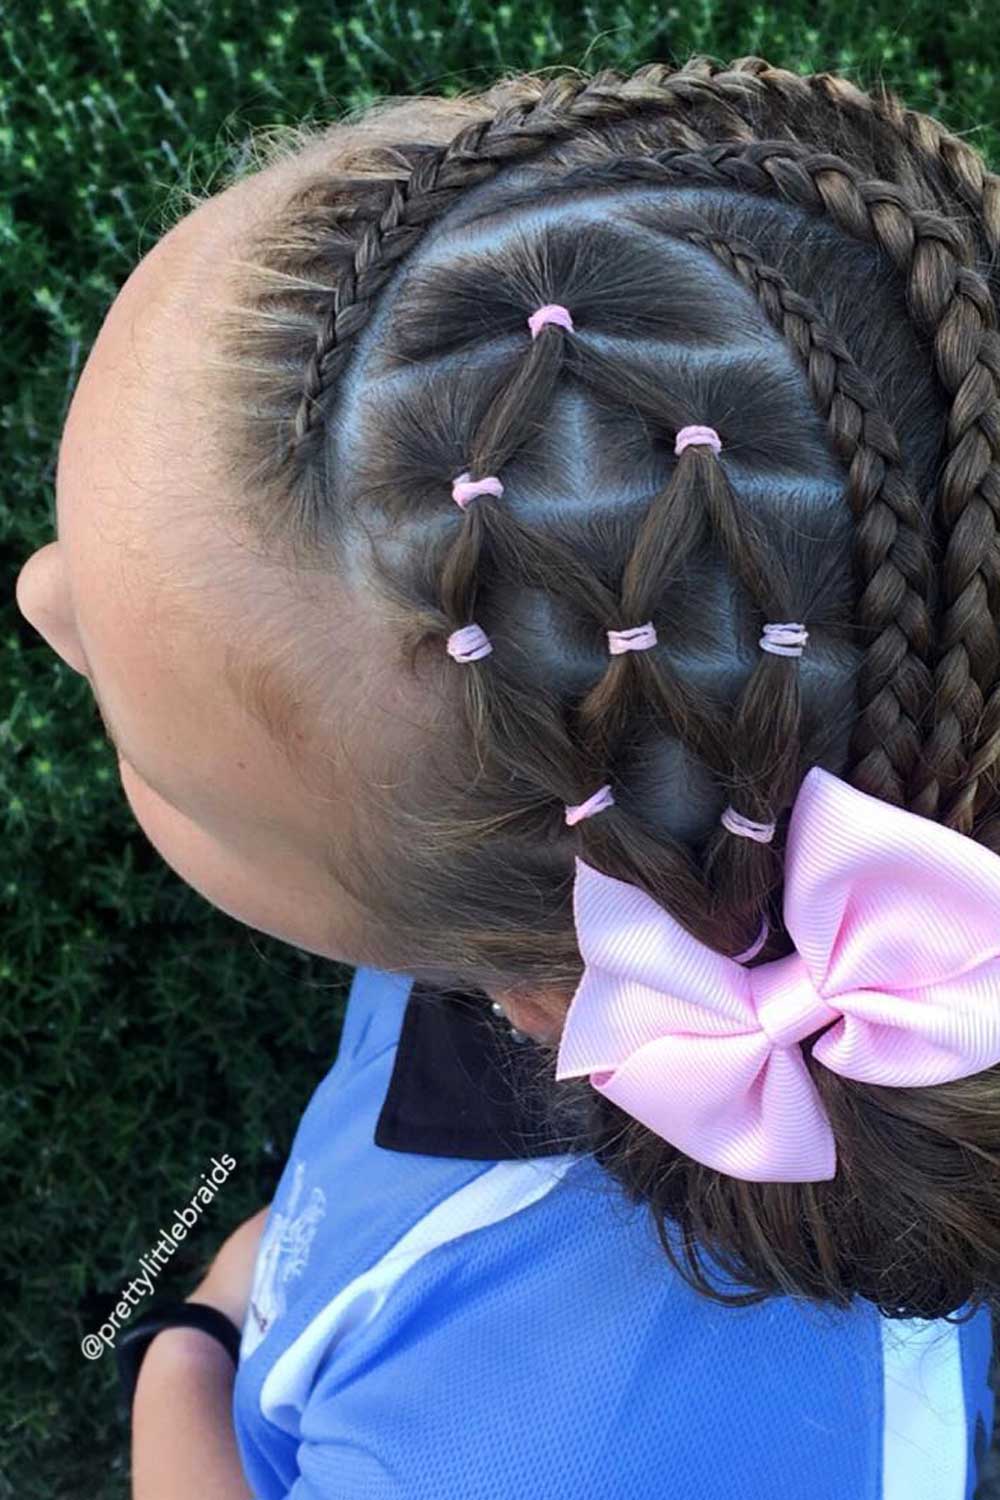 Rubber Band Hairstyles for Girls #rubberbandhairstyles #naturalhairstyles #kidshairstyles